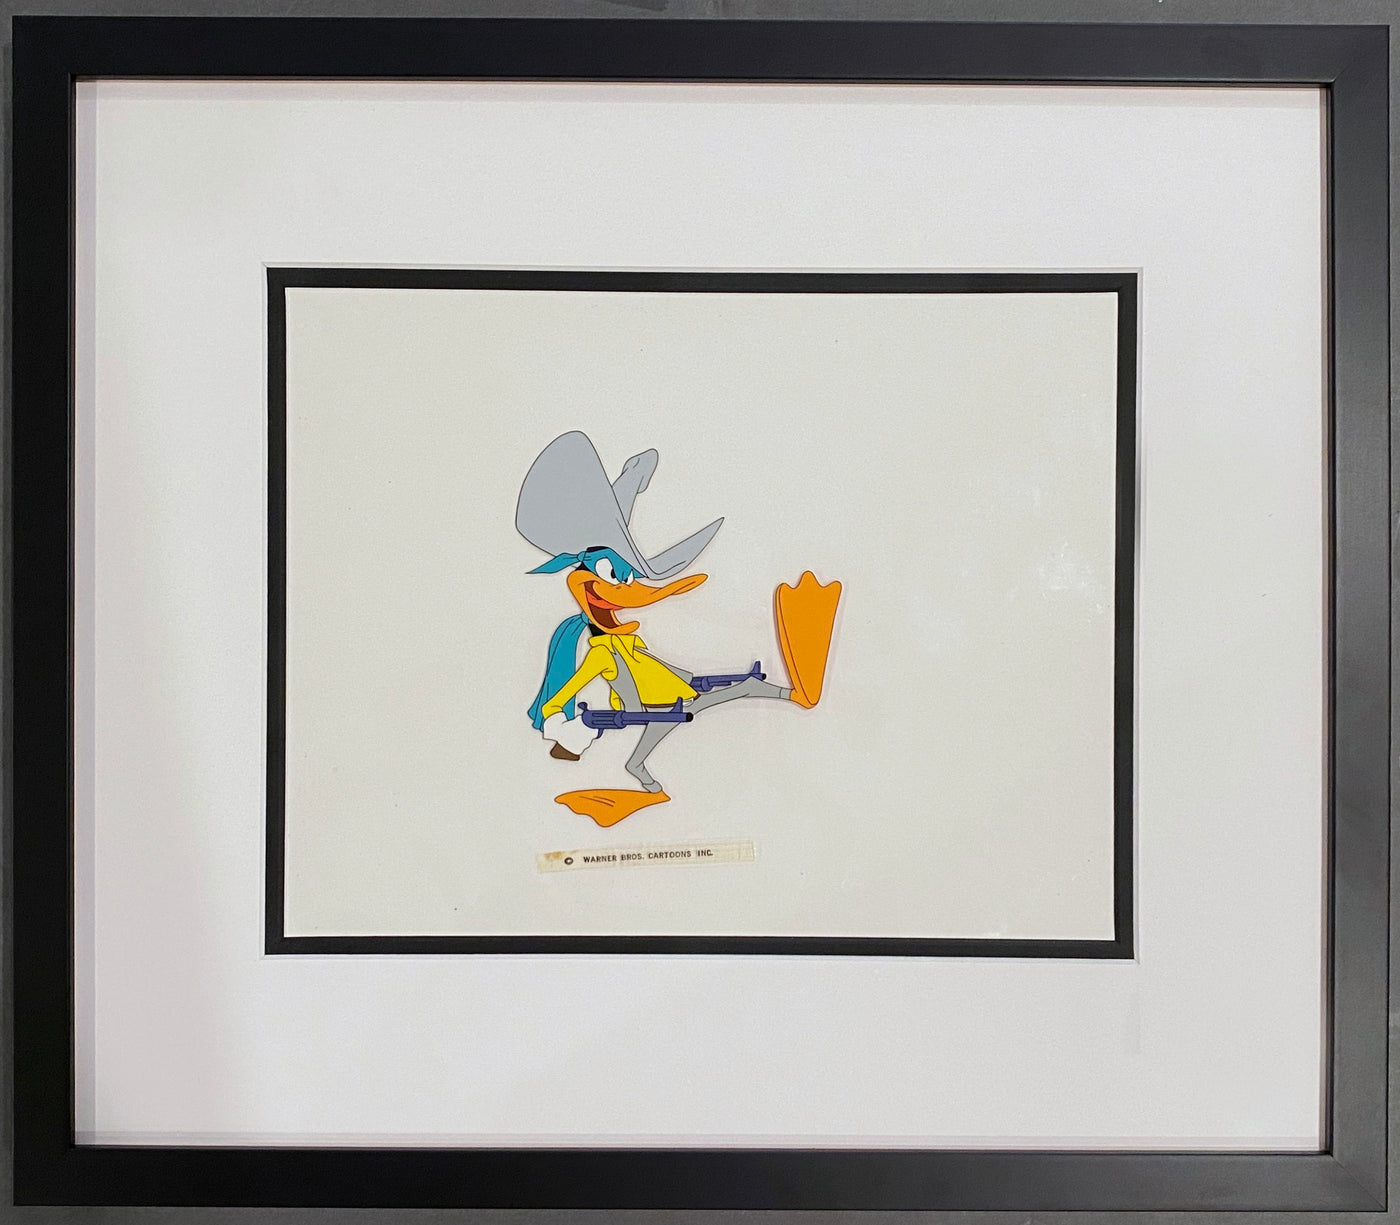 Original Warner Brothers Production Cel of Daffy Duck from My Little Duckaroo (1954)